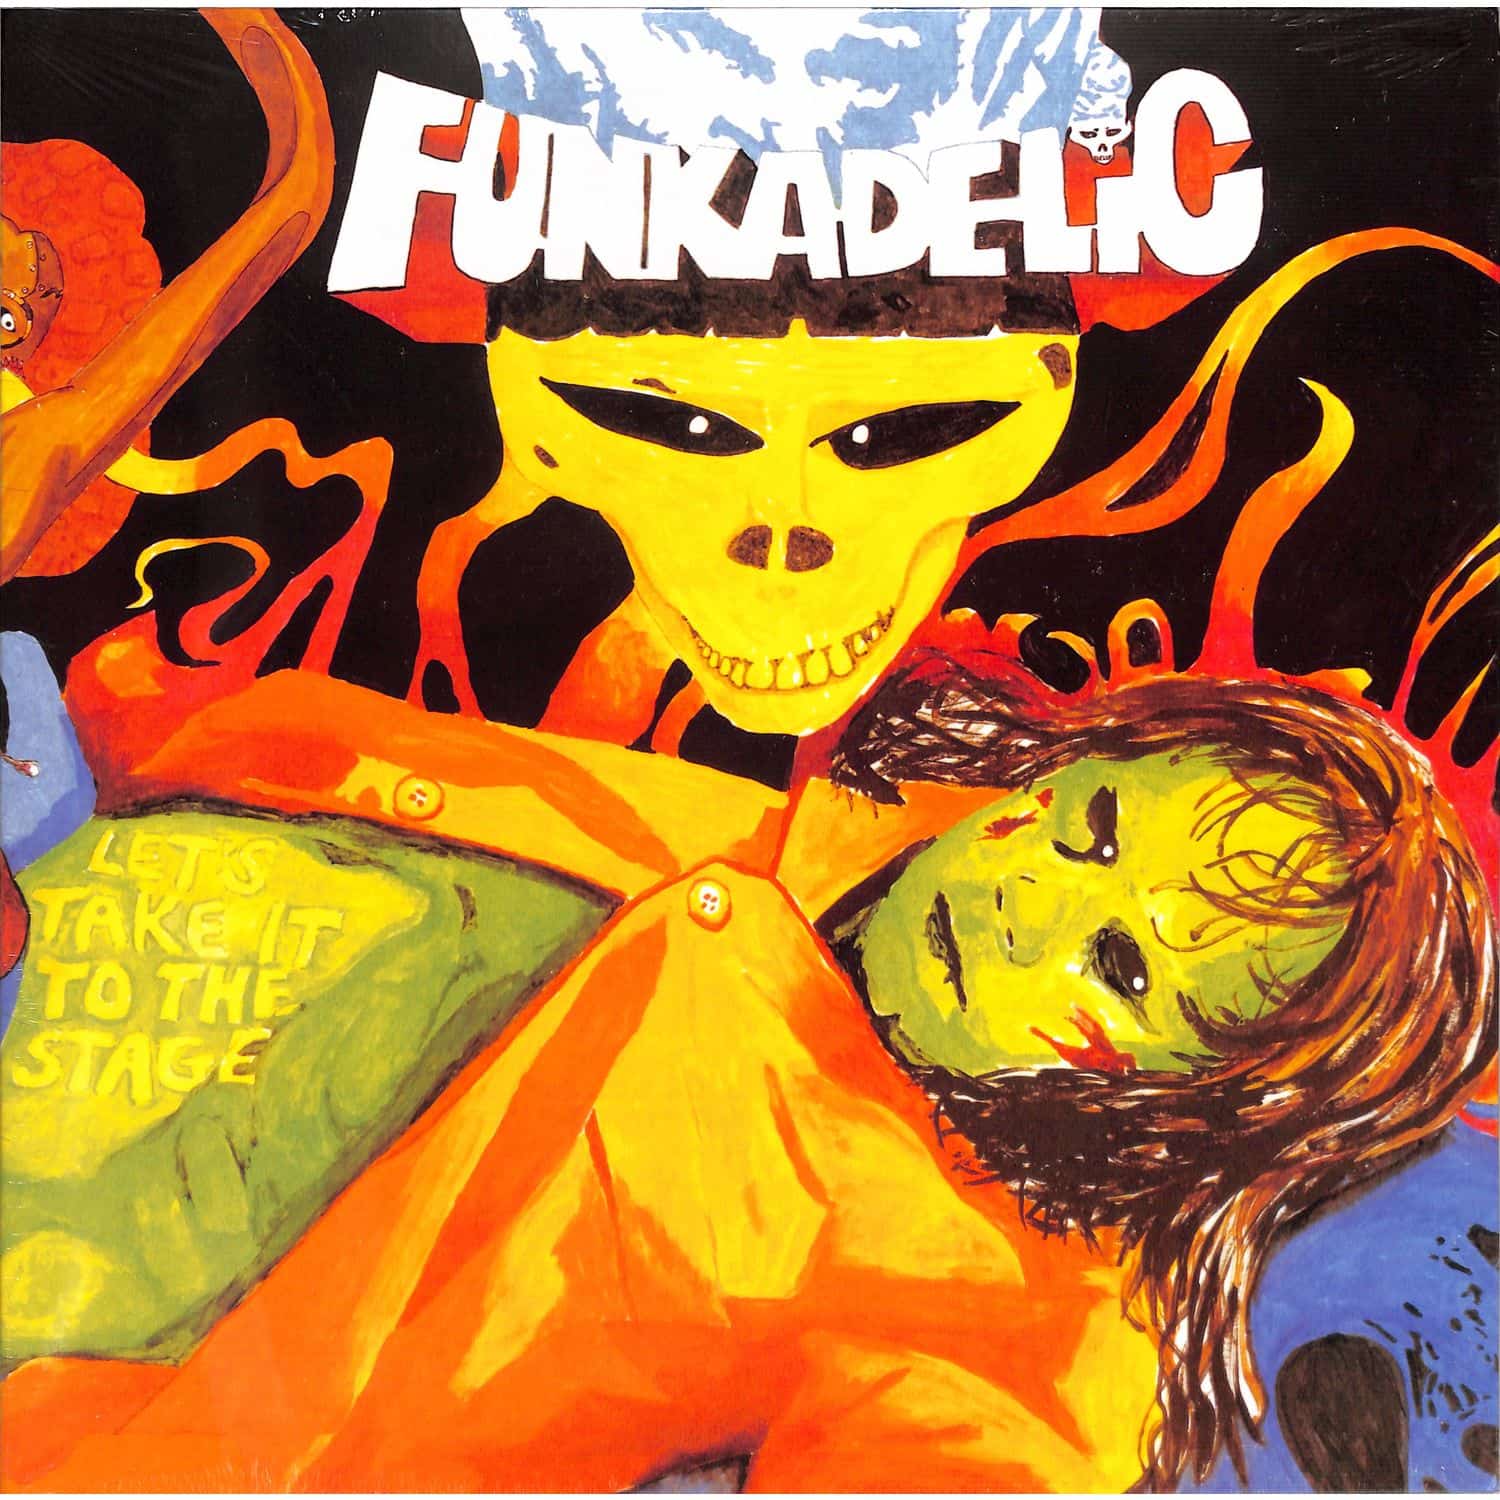 Funkadelic - LETS TAKE IT TO THE STAGE